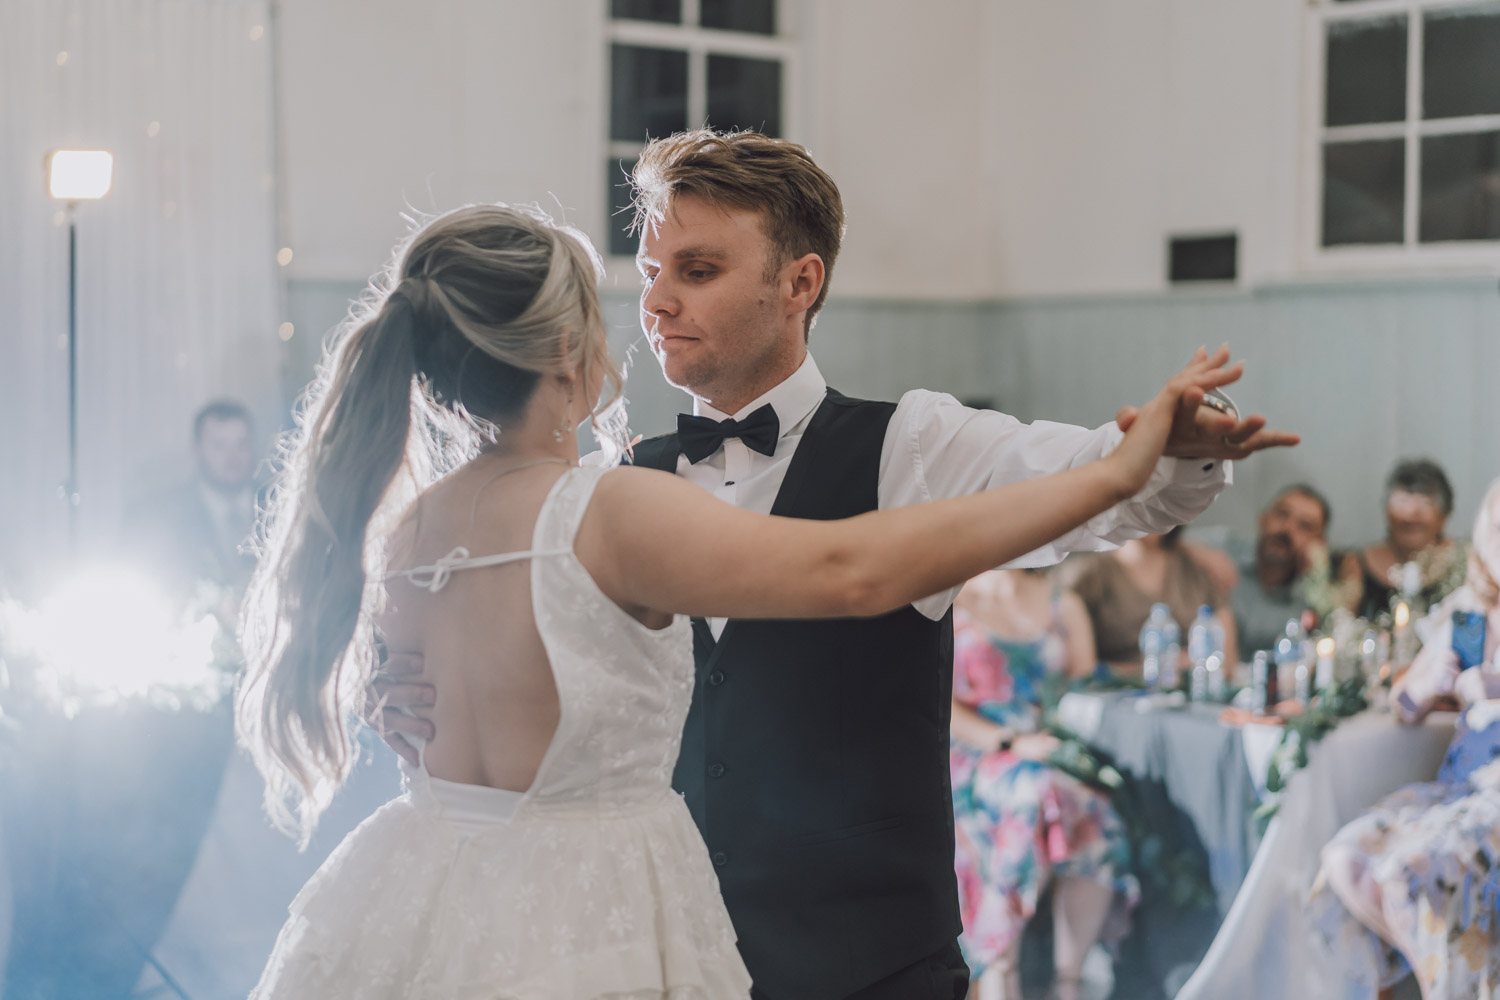 A bride and groom engaged in their first dance in a well-lit Melbourne venue, illustrating a magical moment perfect for a wedding photoshoot in Melbourne. Photo by LaterStory